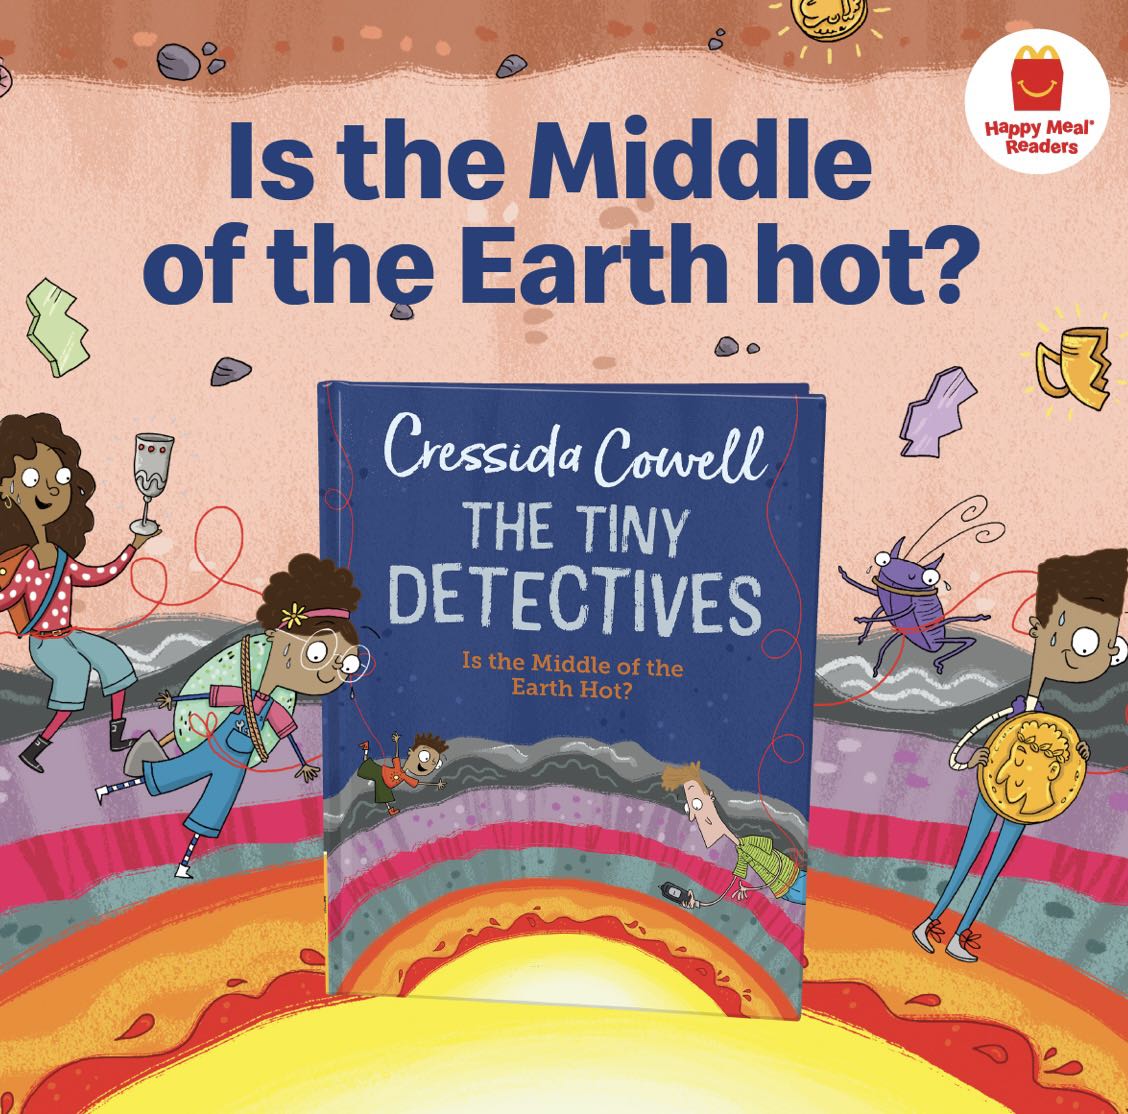 Cressida Cowell’s The Tiny Detectives Happy Meal Readers Hobbies And Toys Books And Magazines